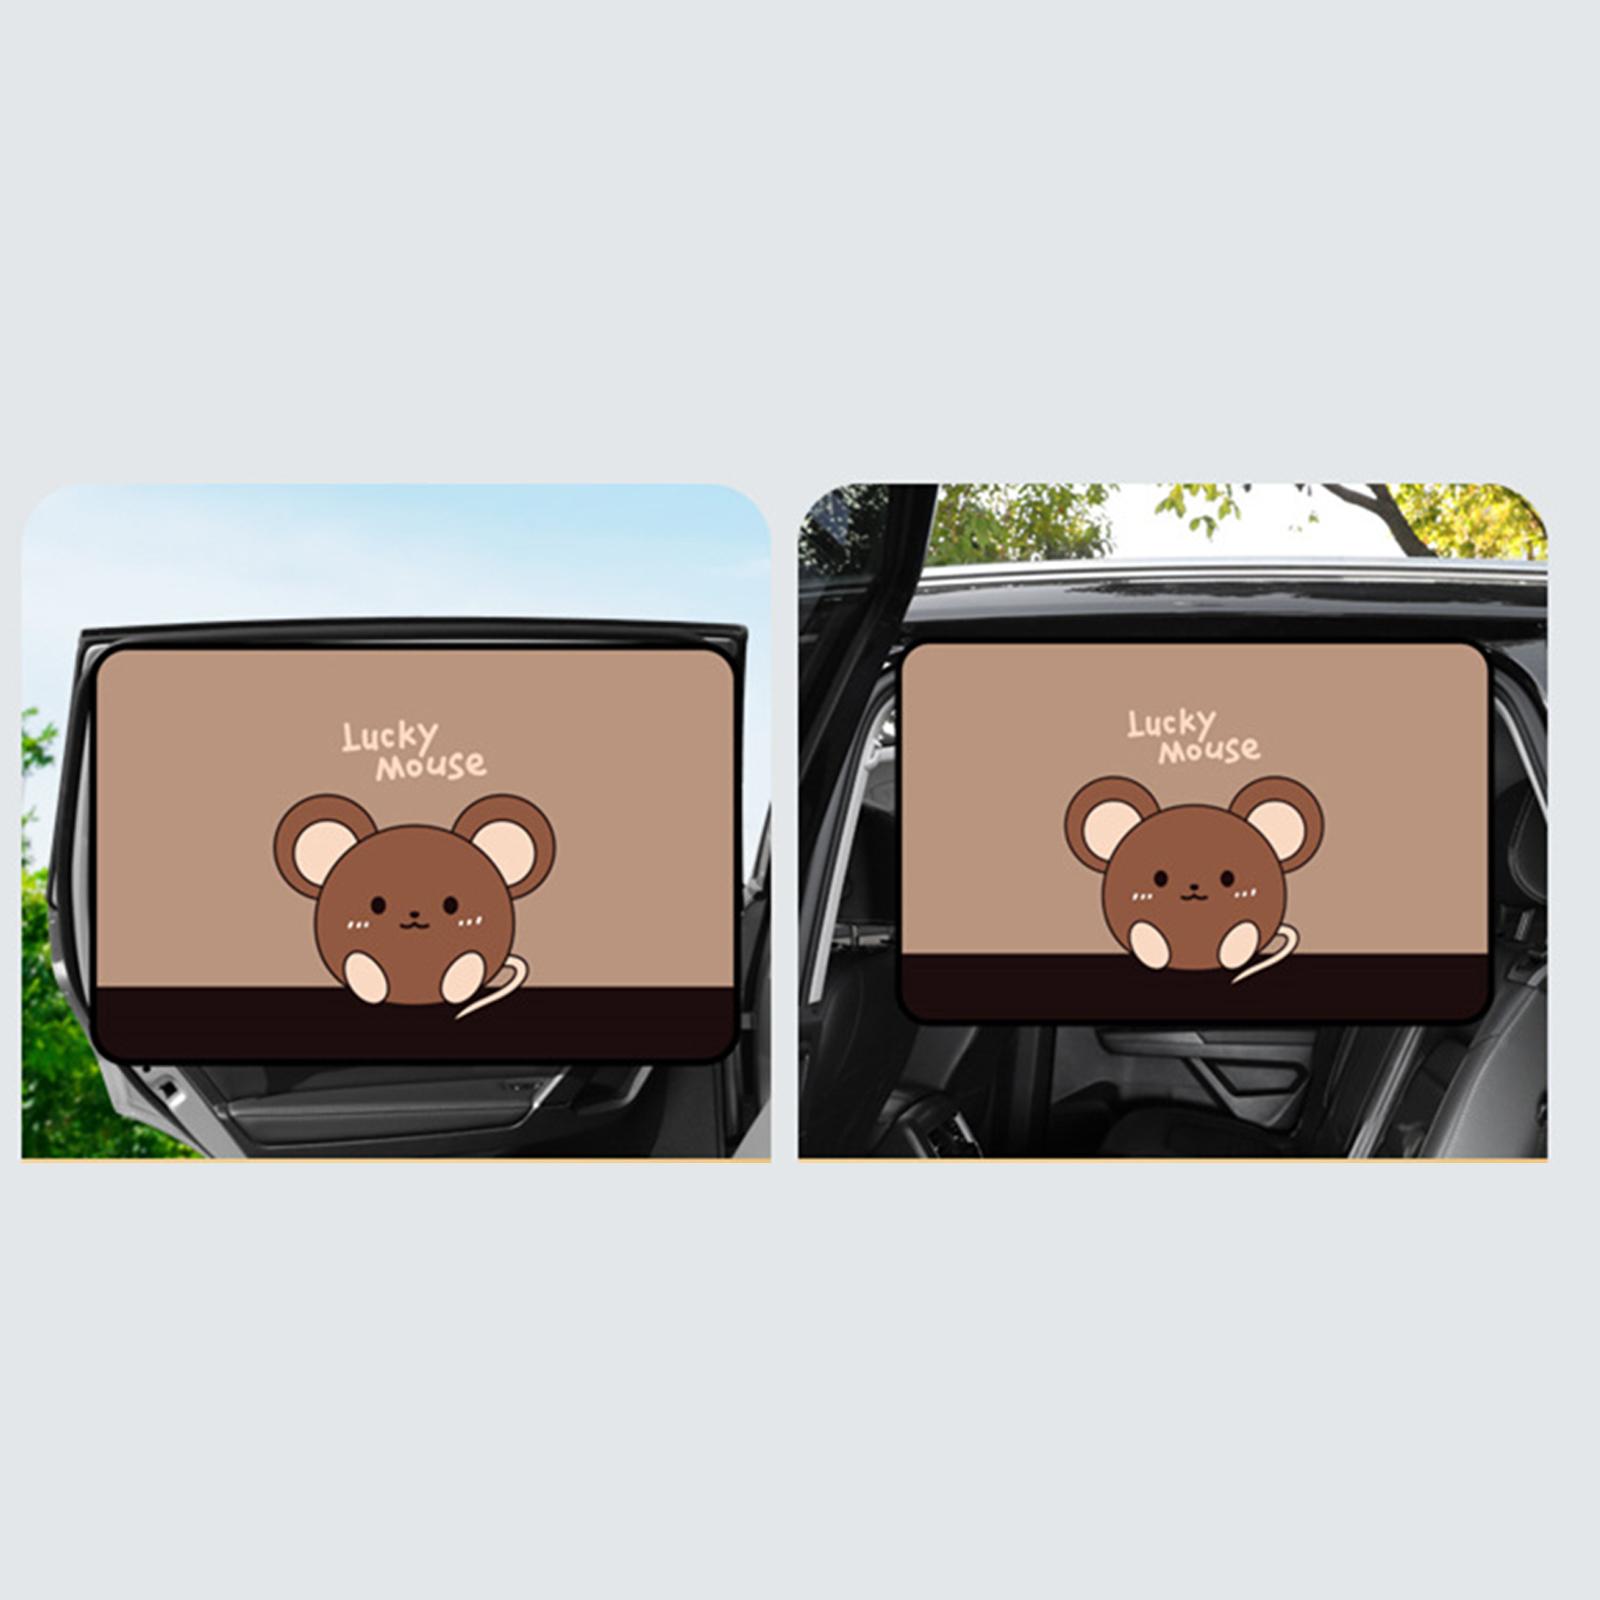 Generic Privacy Curtain Magnetic Car Window Shade for SUV Trucks Travel Brown Passenger